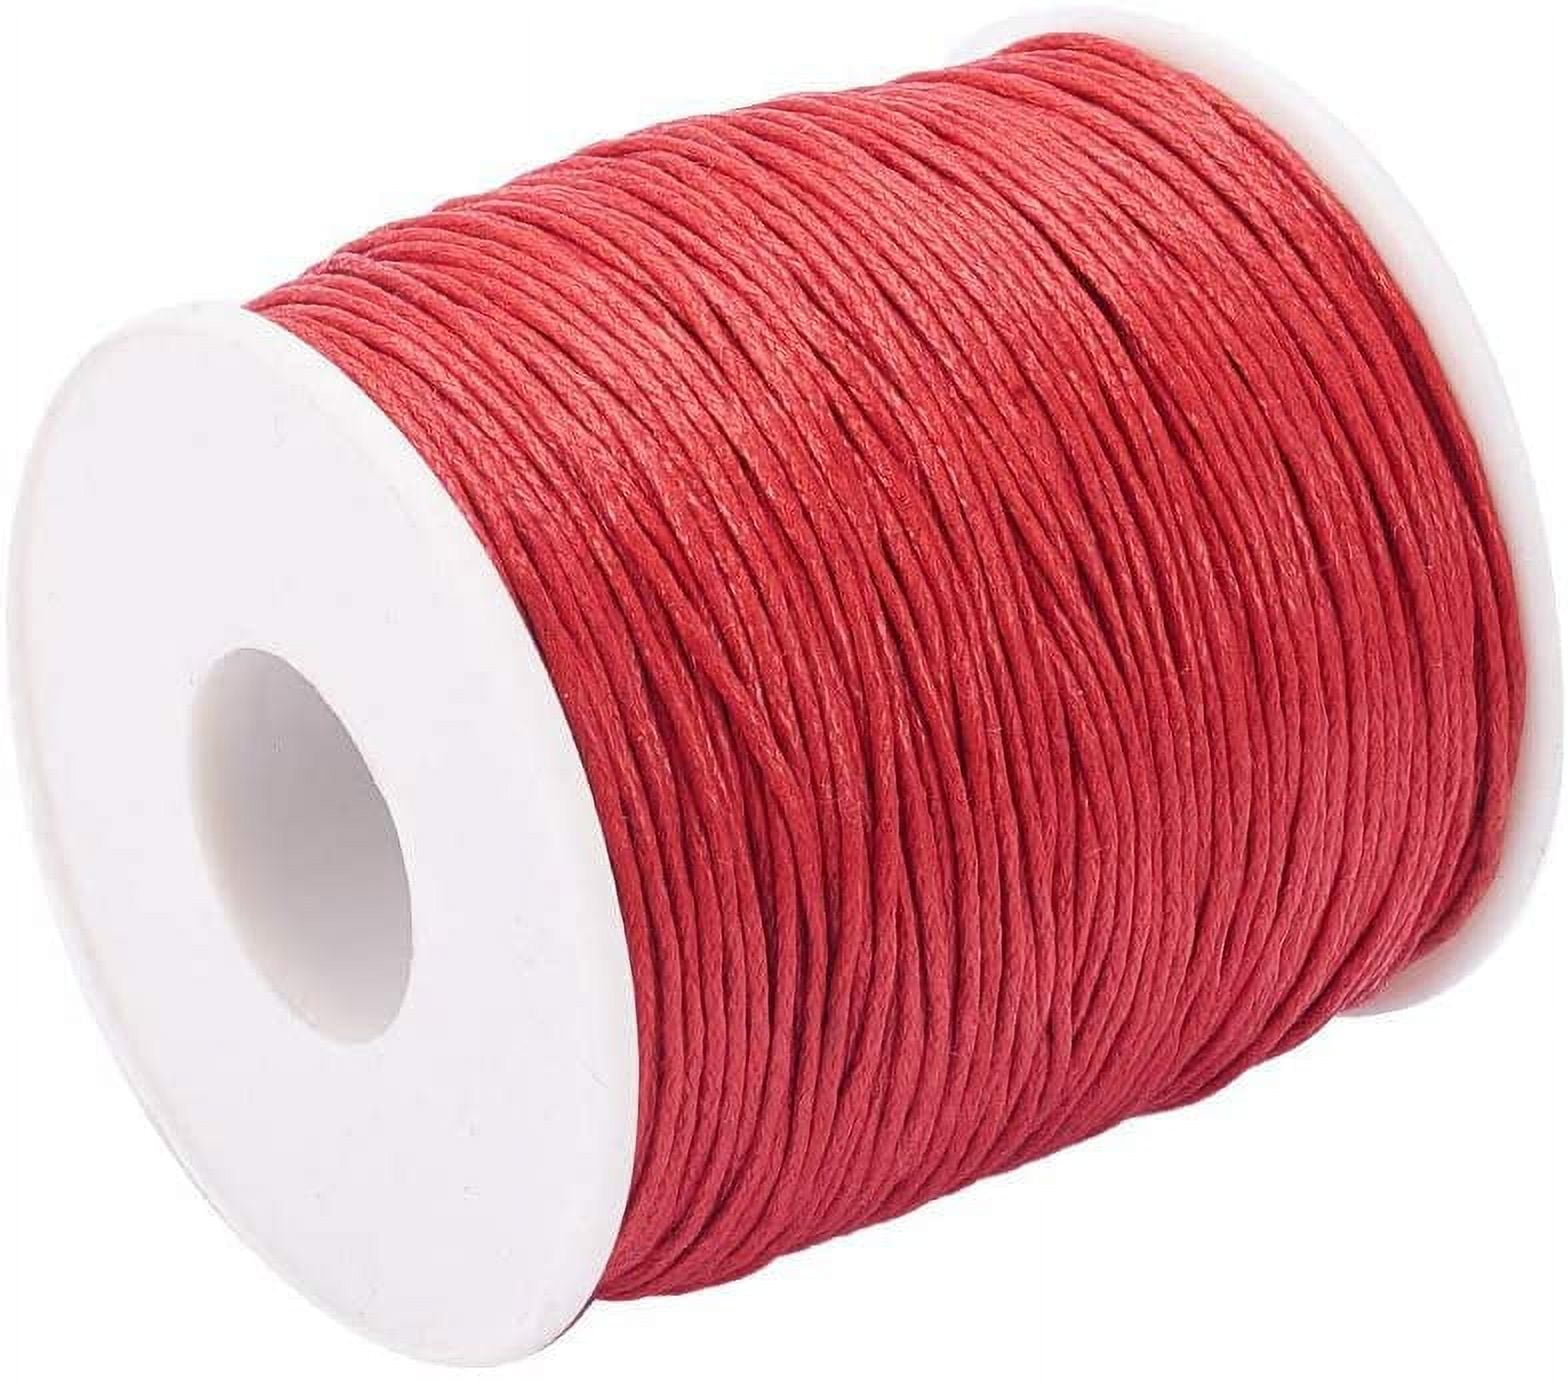 1 Roll 1mm 100 Yards Waxed Cotton Cord Thread Beading String for Jewelry  Making Crafting Beading Macrame Golden